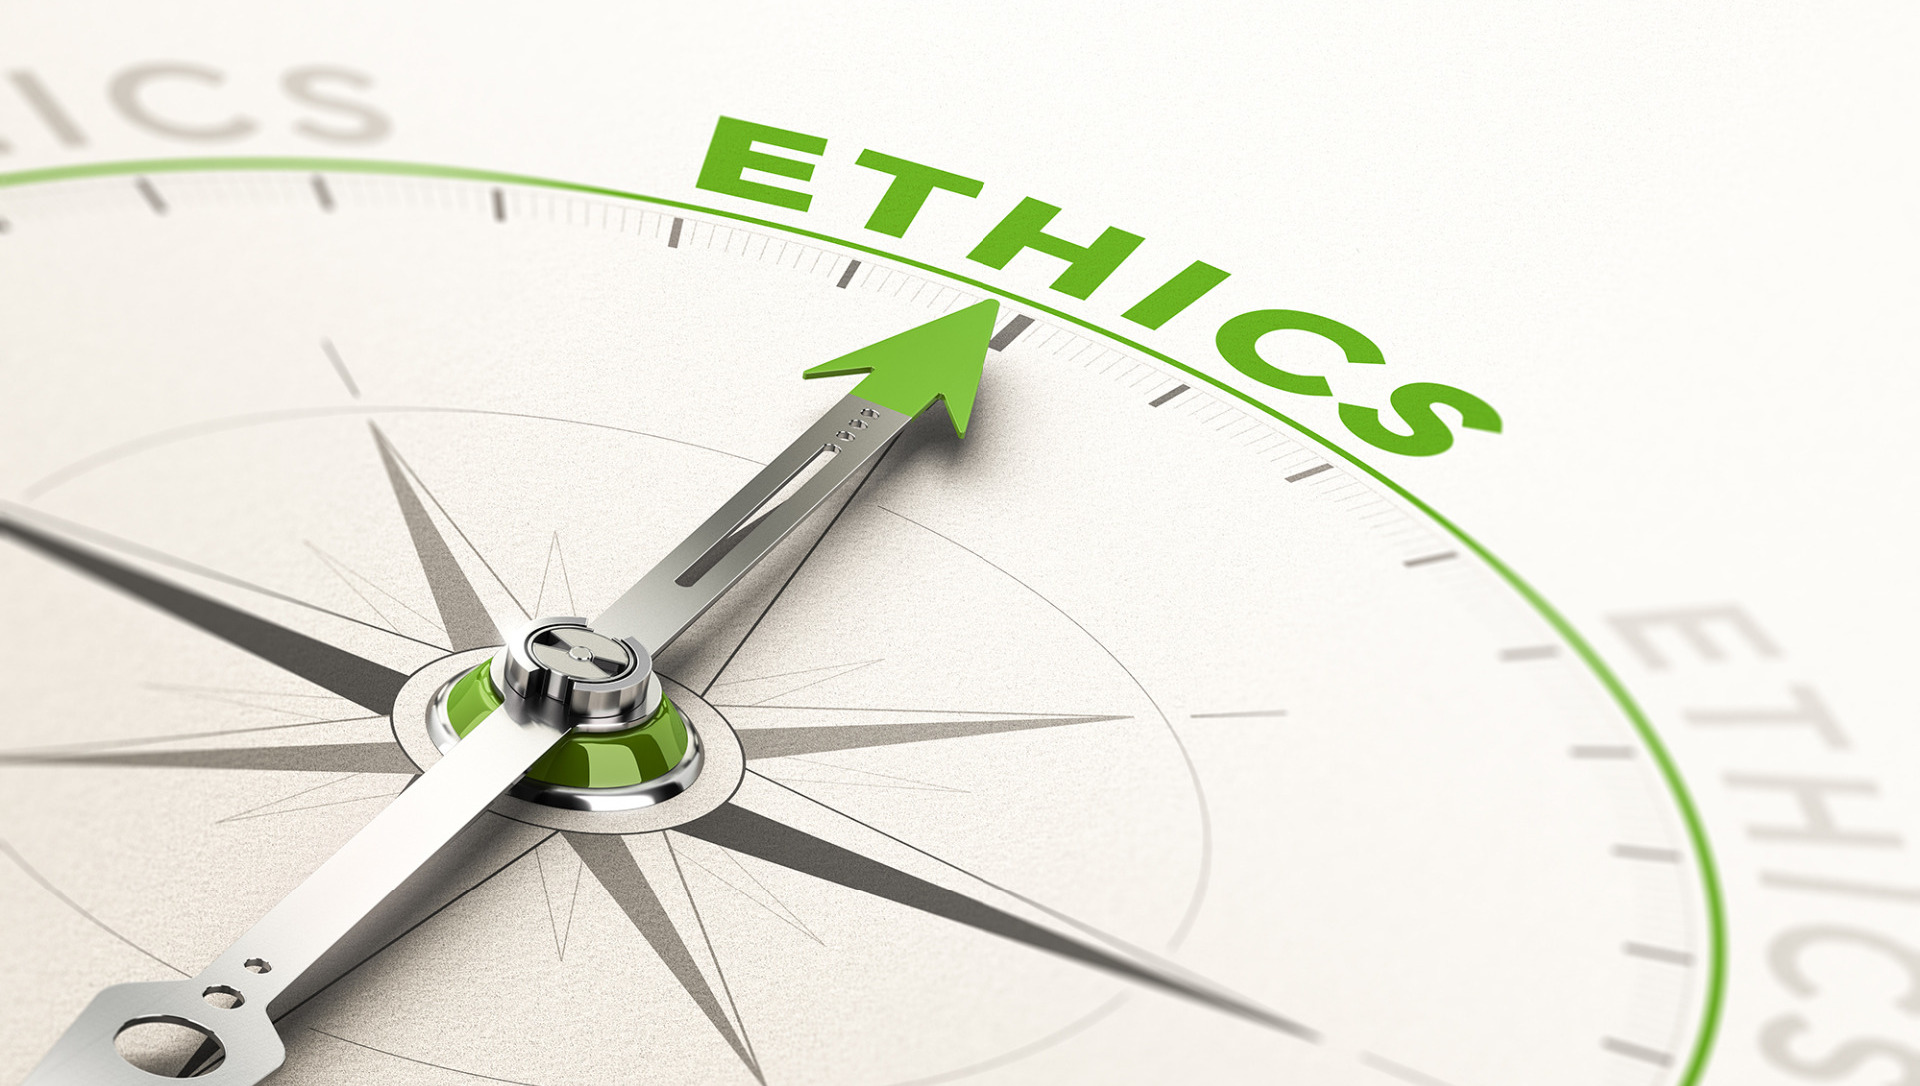 Moral Compass pointing towards Ethics